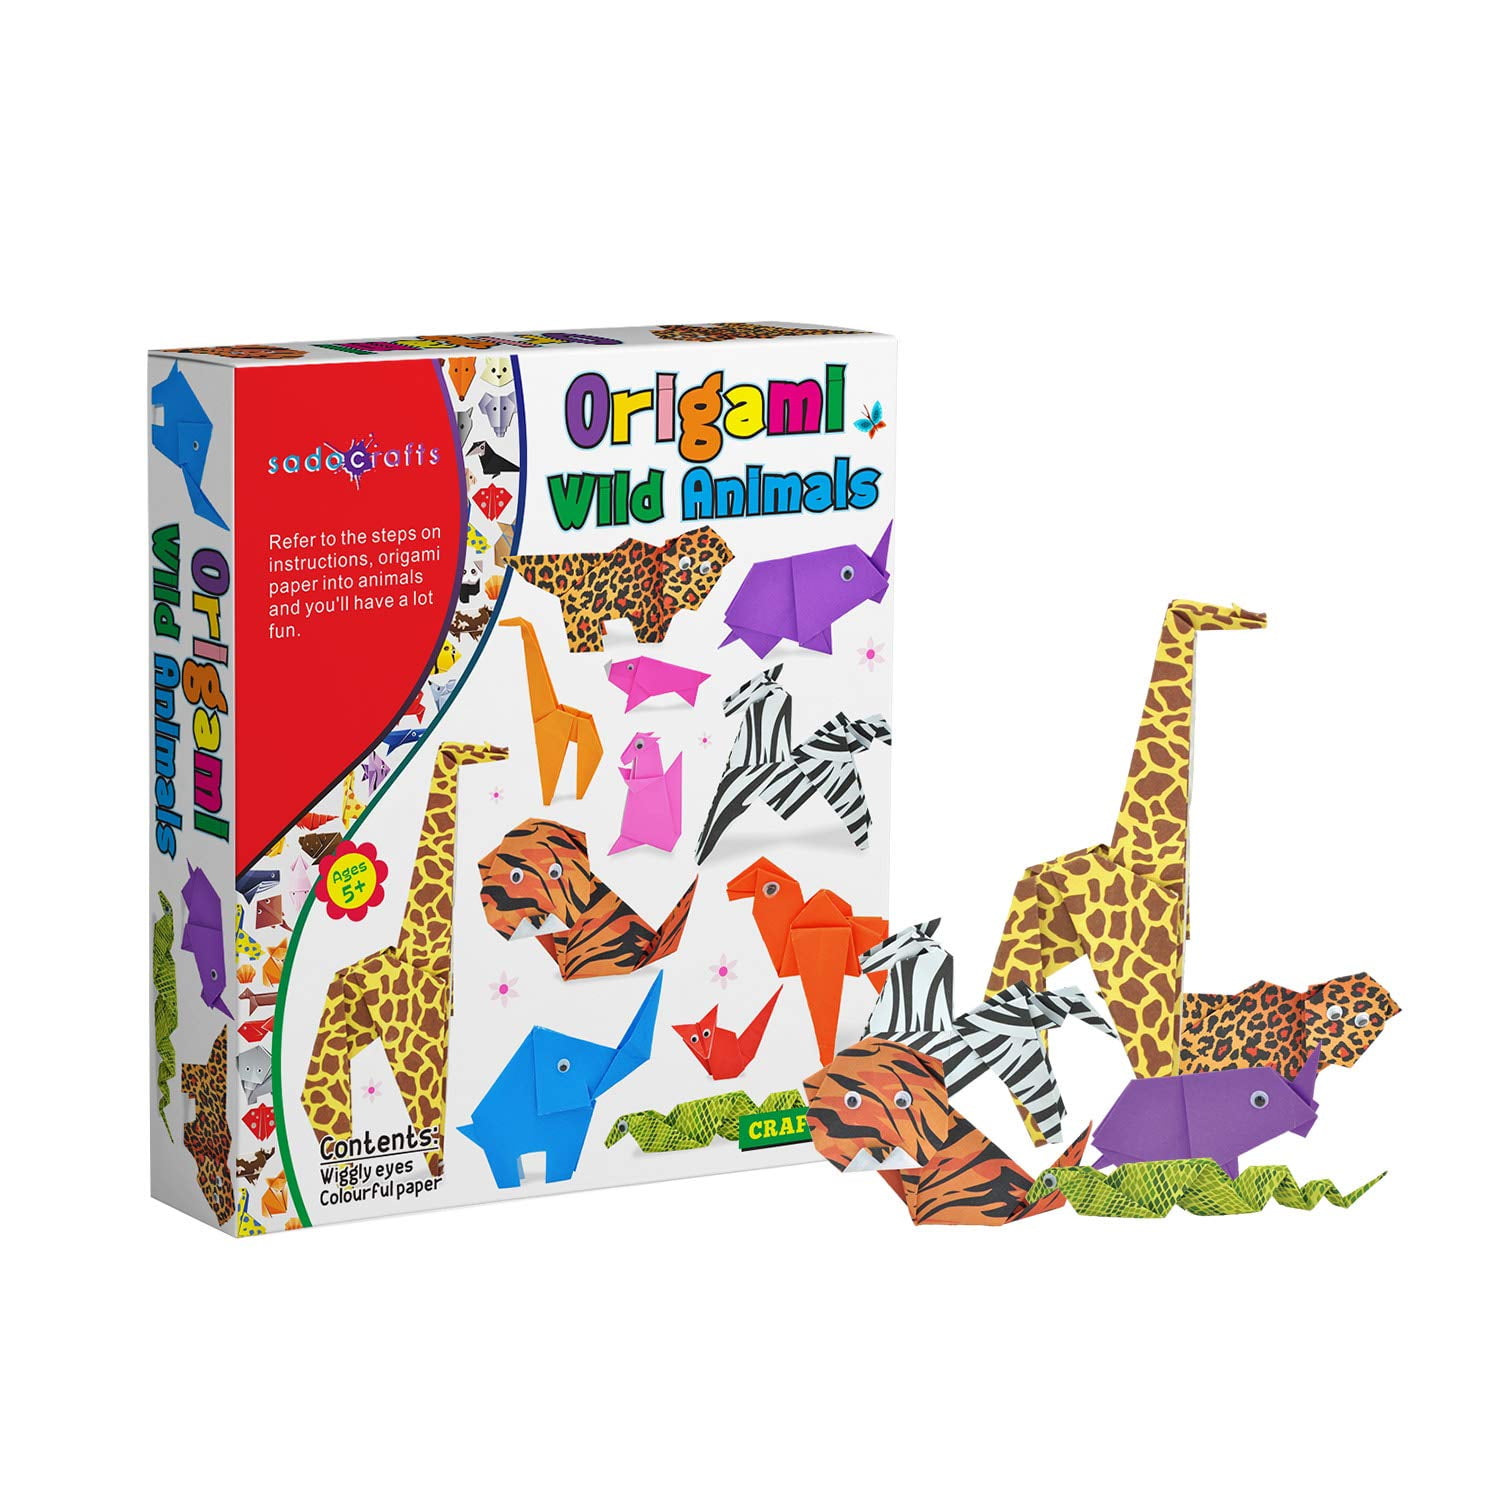 SadoCrafts Fantastic Origami Wild Animals - Your Kids' Perfect Choice for a  Fun, Splashy, Simple and Do-It-Yourself Art Activity 